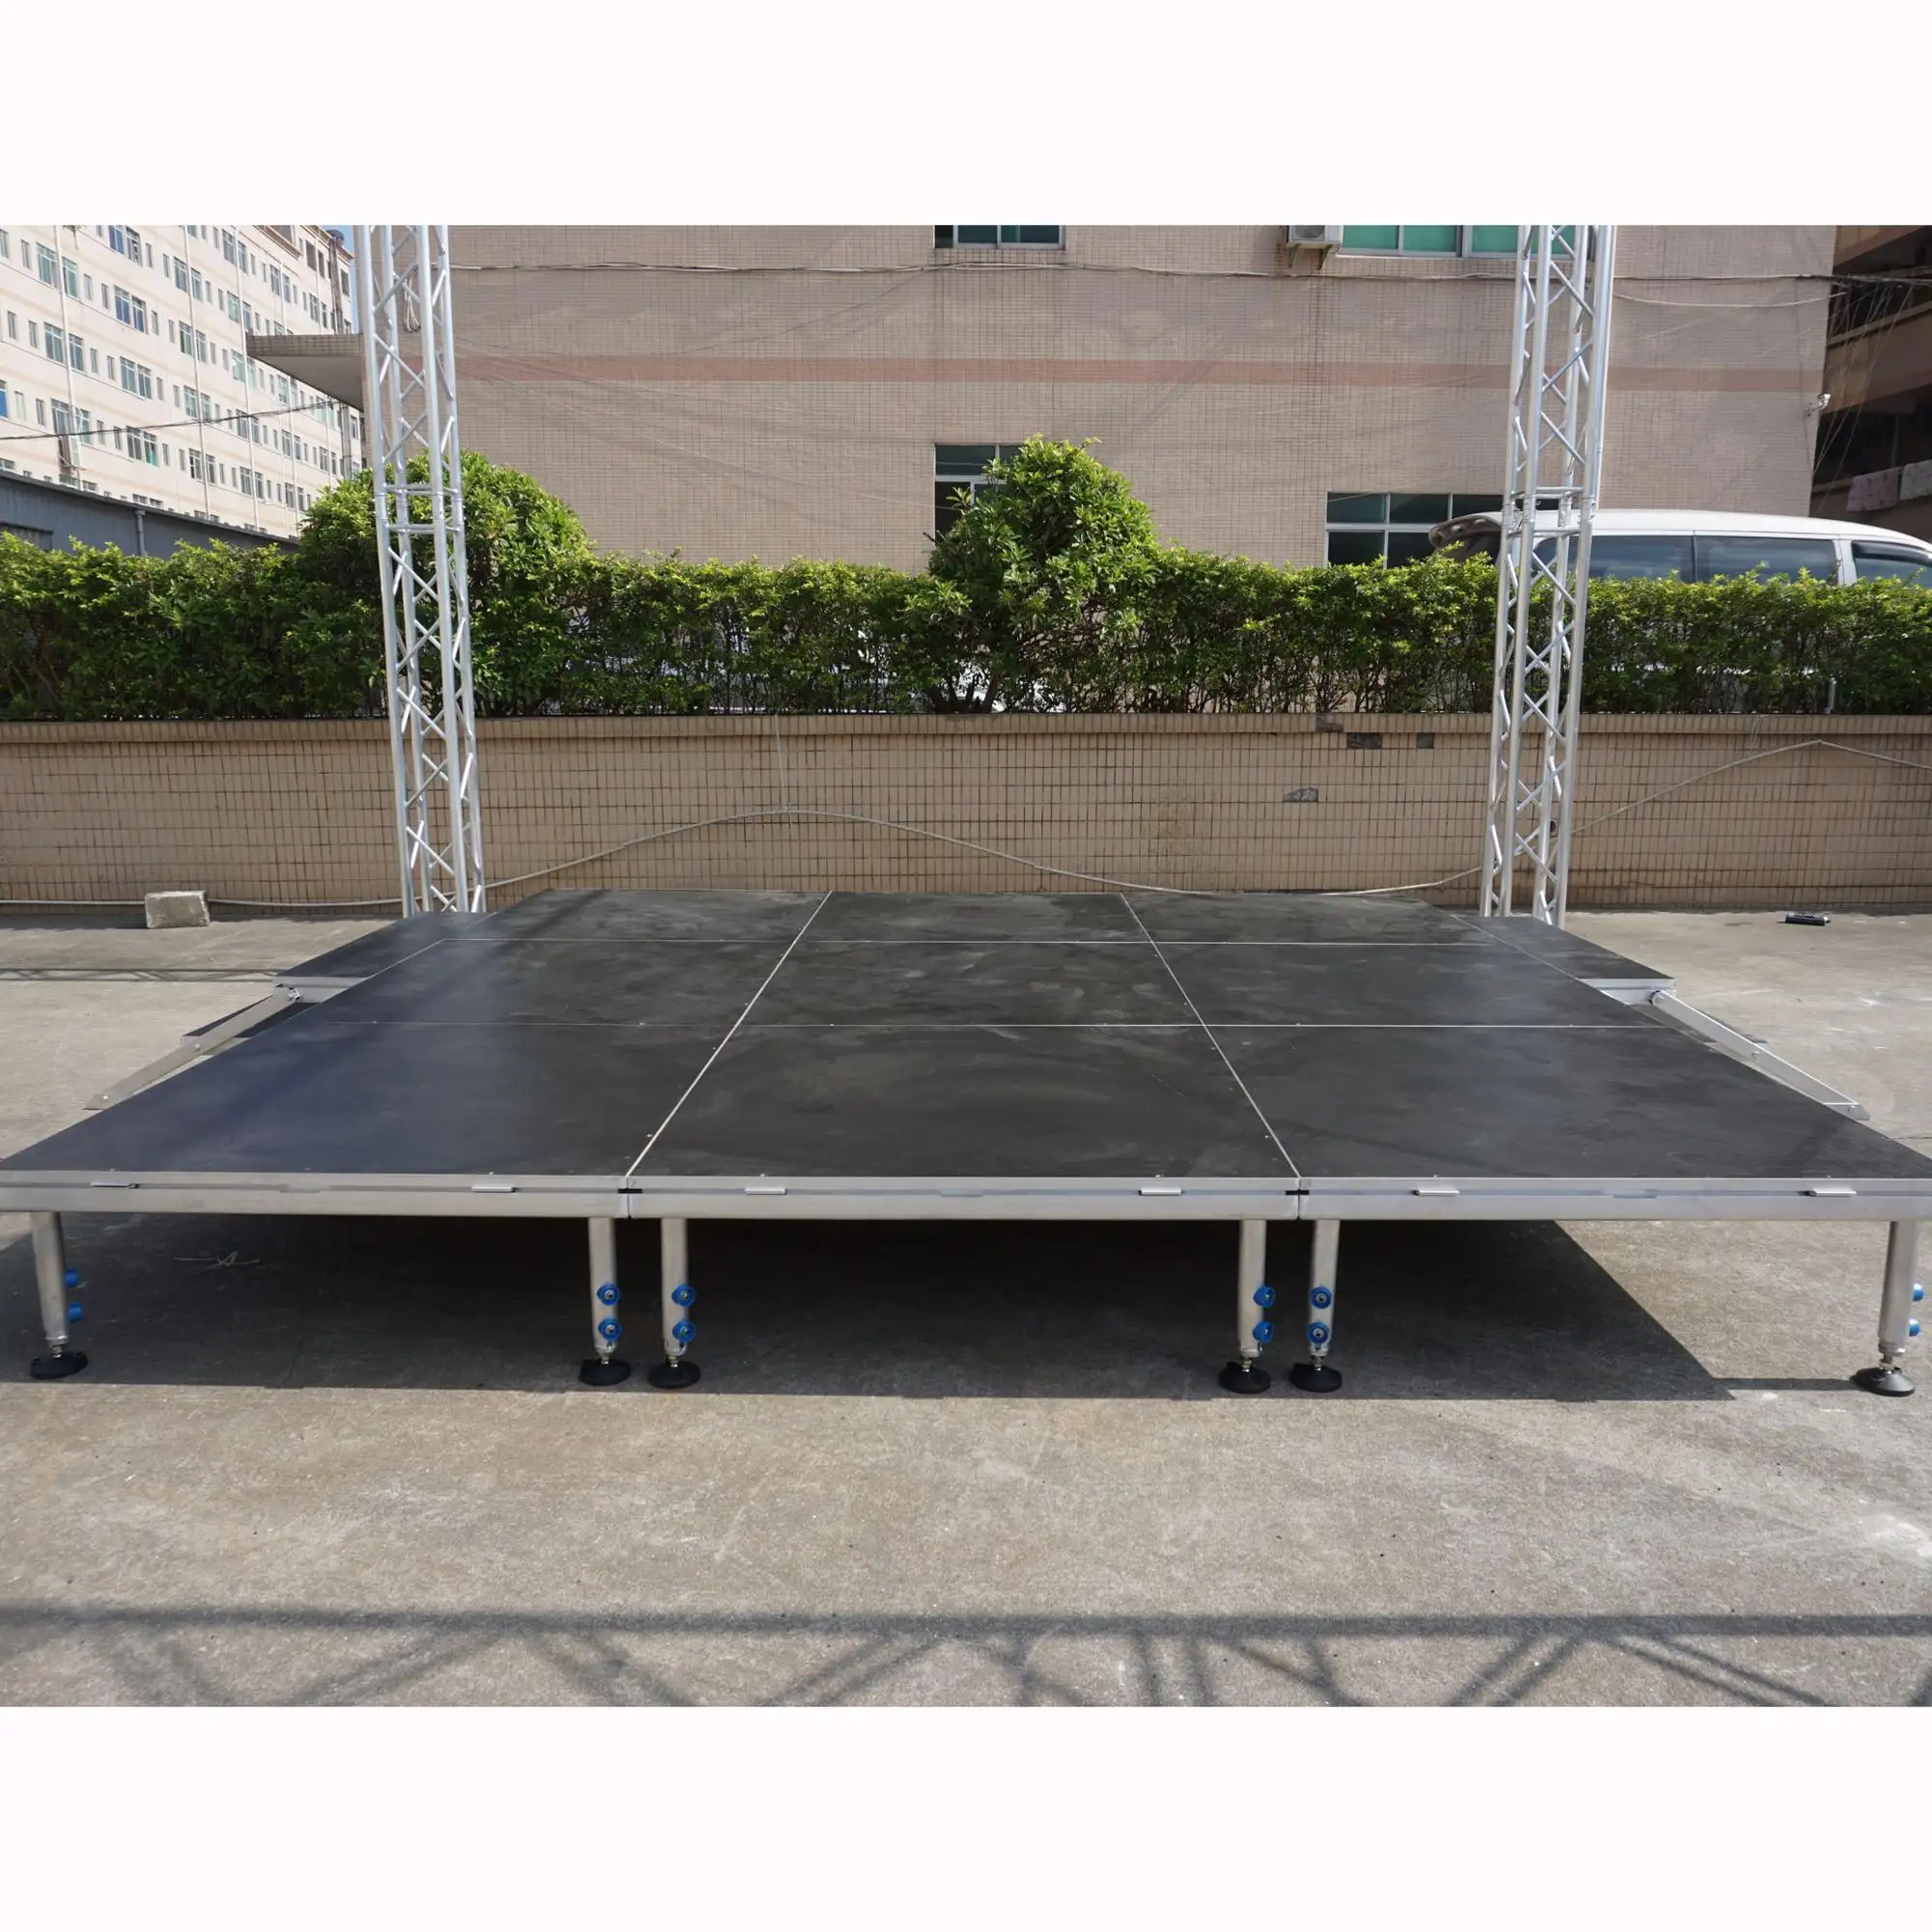 beyond stage with four legs carton package platform & legs 1*2m 3'x3' 4'x4' stage platform on sale